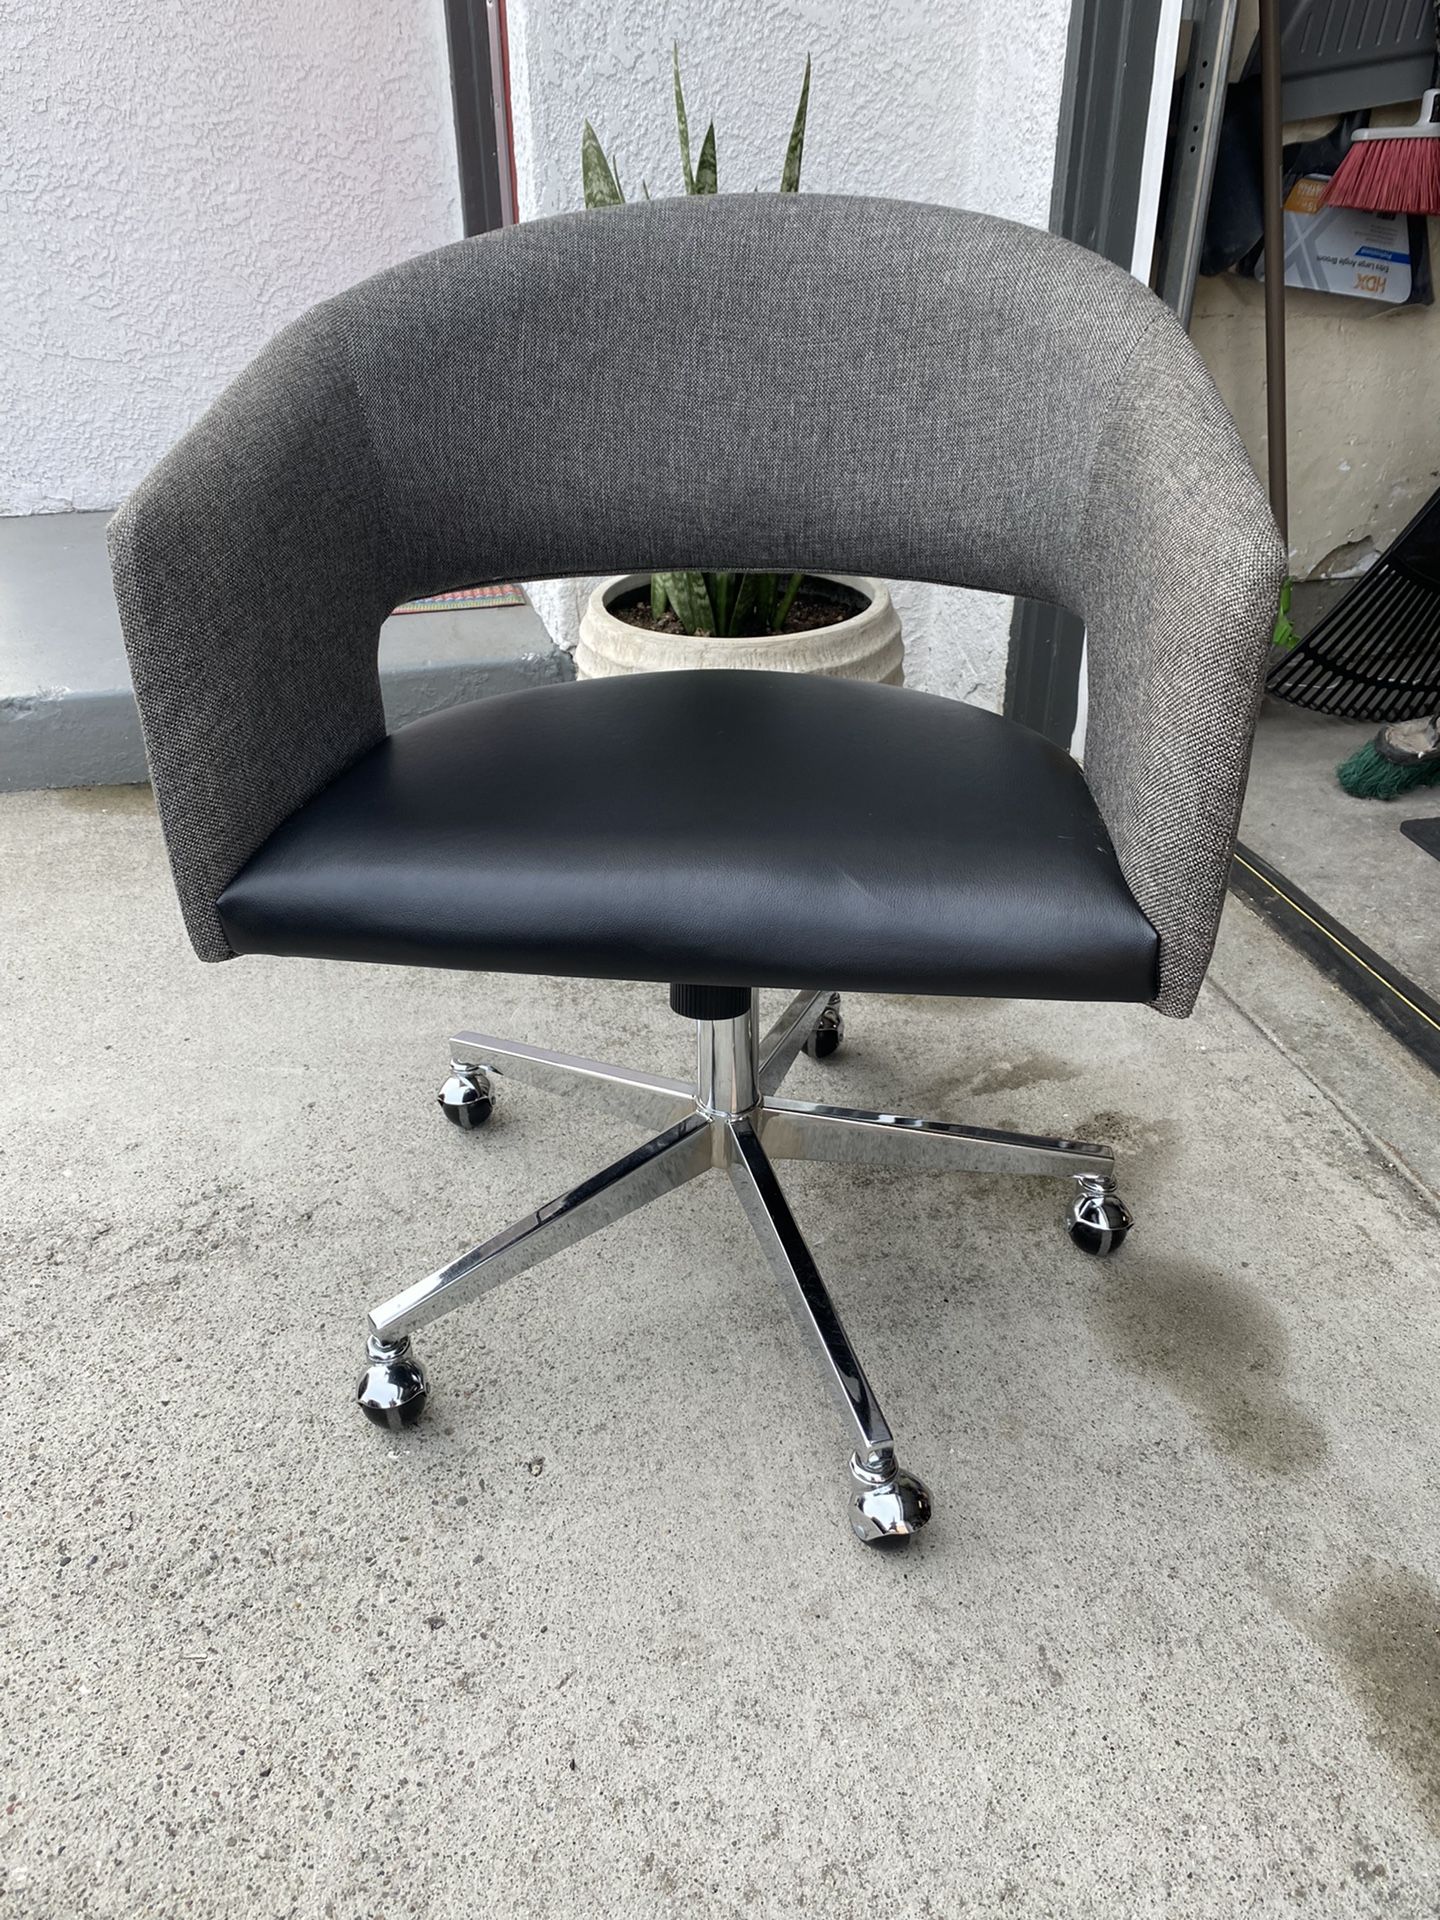 Crate & Barrel Crescent Office Chair